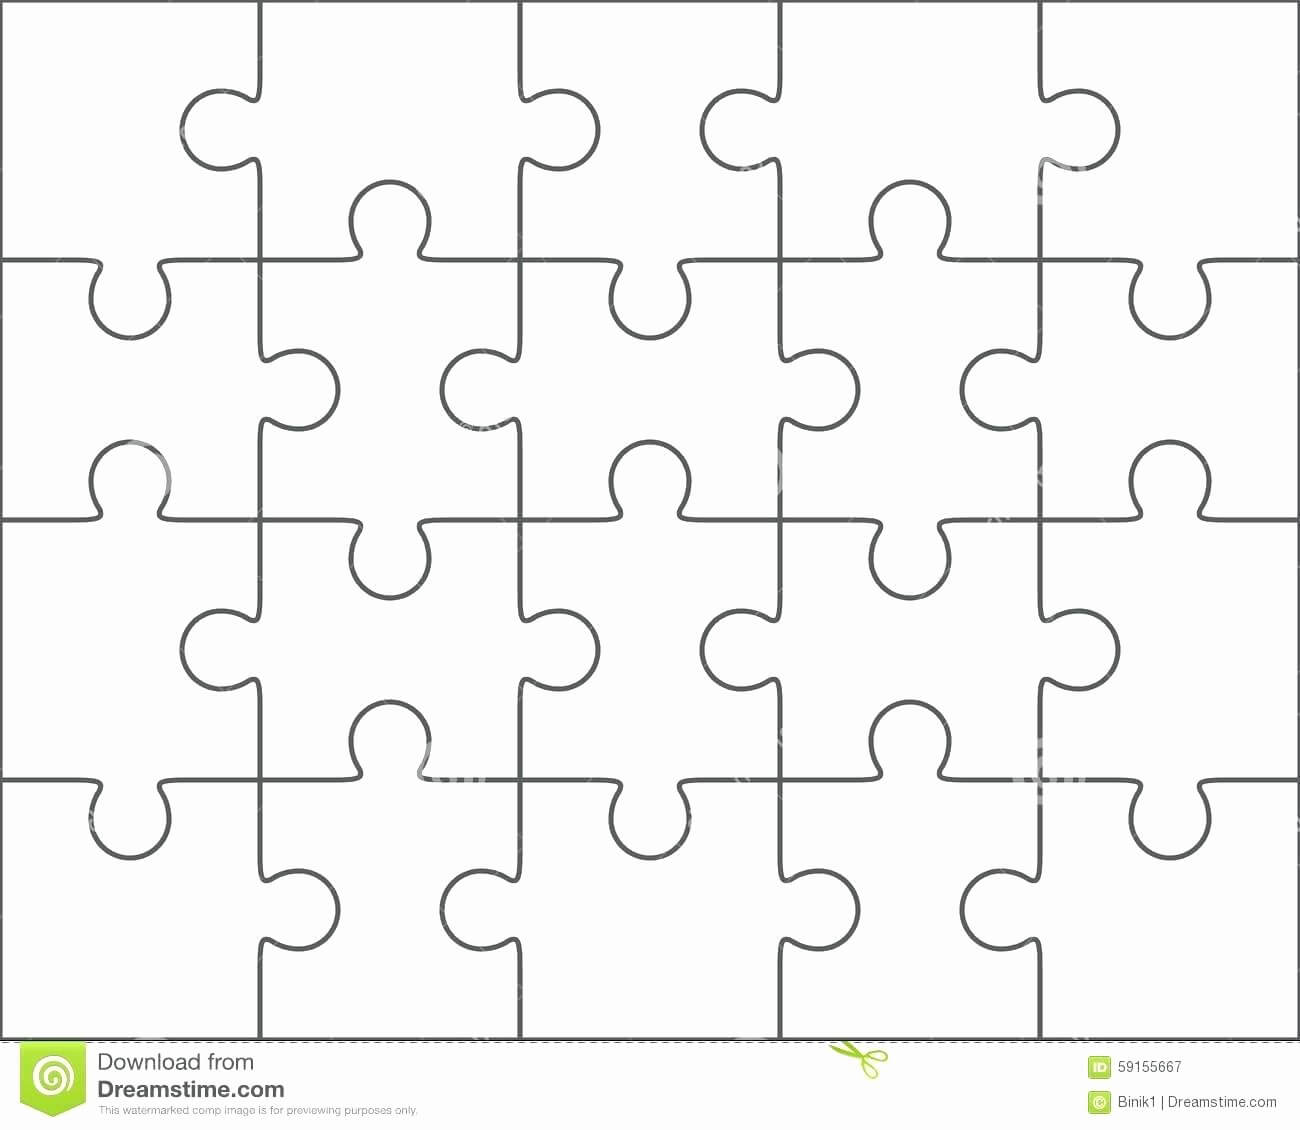 030 Puzzle Pieces Template For Word Best Of Piece Intended Regarding Blank Jigsaw Piece Template